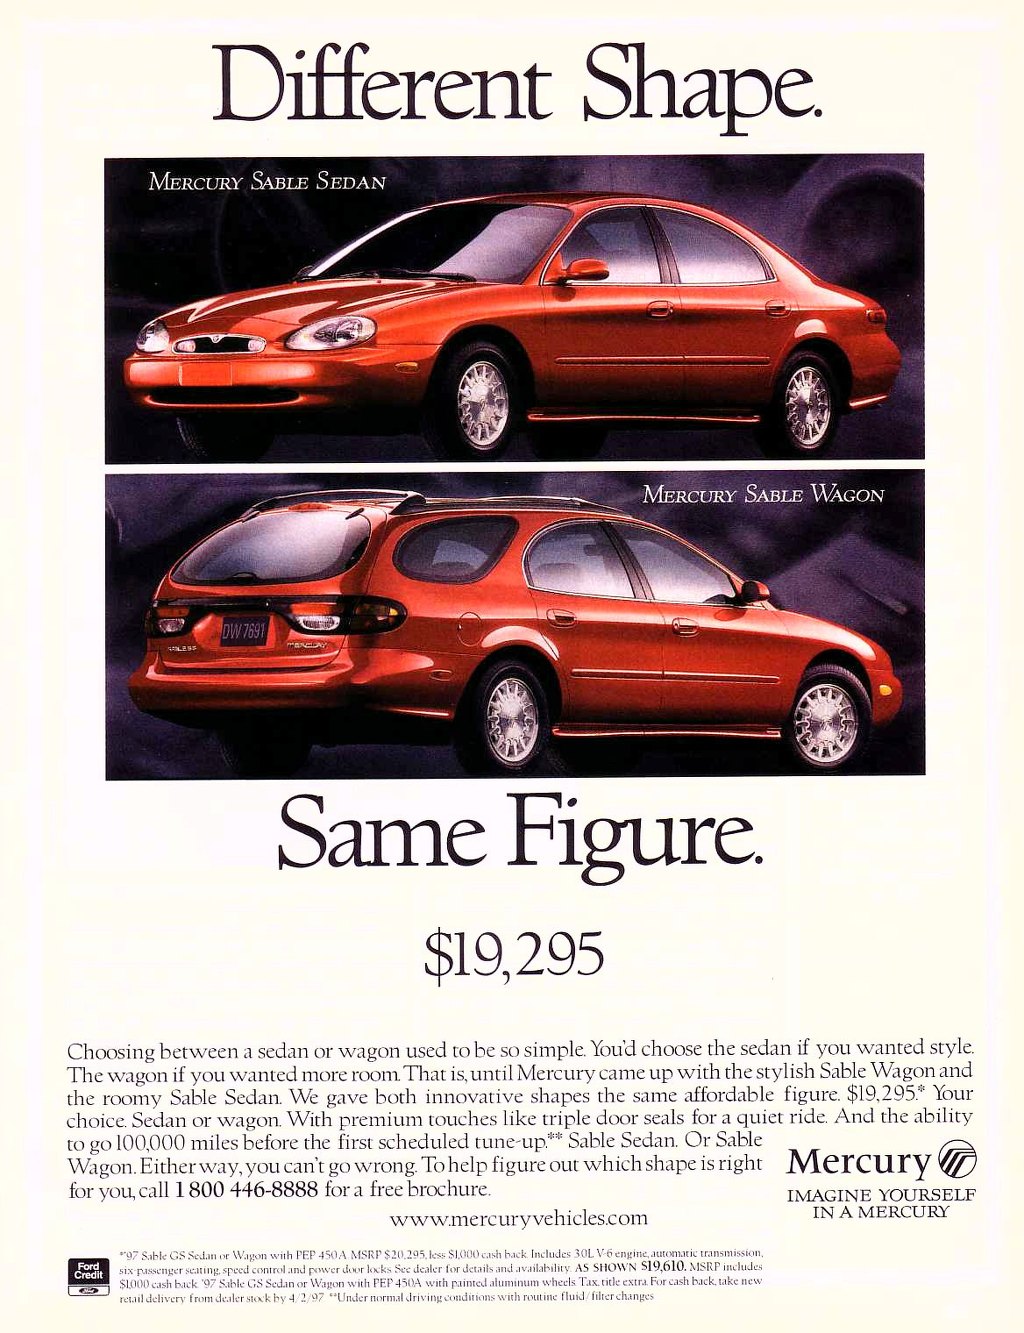 The Mercury Sable Sedan and the Mercury Sable Wagon. Different shape. Same figure. Starting at $19,295. Choosing between a sedan or wagon used to be so simple. You'd choose the sedan if you wanted style. The wagon if you wanted more room. That is,until Mercury came up with the stylish Sable Wagon and the roomy Sable Sedan. We gave both innovative shapes the same affordable figure. $19,295.* Your choice. Sedan or wagon. With premium touches like triple door seals for a quiet ride. And the ability to go 100,000 miles before the first scheduled tune-up.** Sable Sedan. Or Sable Wagon. Either way, you can't go wrong. To help figure out which shape is right Mercury for you, call 1 800 446-8888 for a free brochure. IMAGINE YOURSELF 
Ford Credit 
1 OM J 
www.mercuryvehicles.com 
''97 Sable GS Sedan or Wagon with PEP 450A MSRP $20.295.1ess SI,000 cash back Includes 30L V6 engine, automatic transmission. six-passenger seating, speed control and pi ,wer door locks See dealer for details and a va ilabil it y AS SHOWN S19,610. MSRP includes 4L000 cash back '97 Sable CS Sedan or Wagon with PEP 450A with painted aluminum wheels Tax. title extra For cash back, take new retail delivery from dealer stock by -I 2..97 ''Under normal driving conditions with routine fluid/filter changes 
IN A MERCURY 